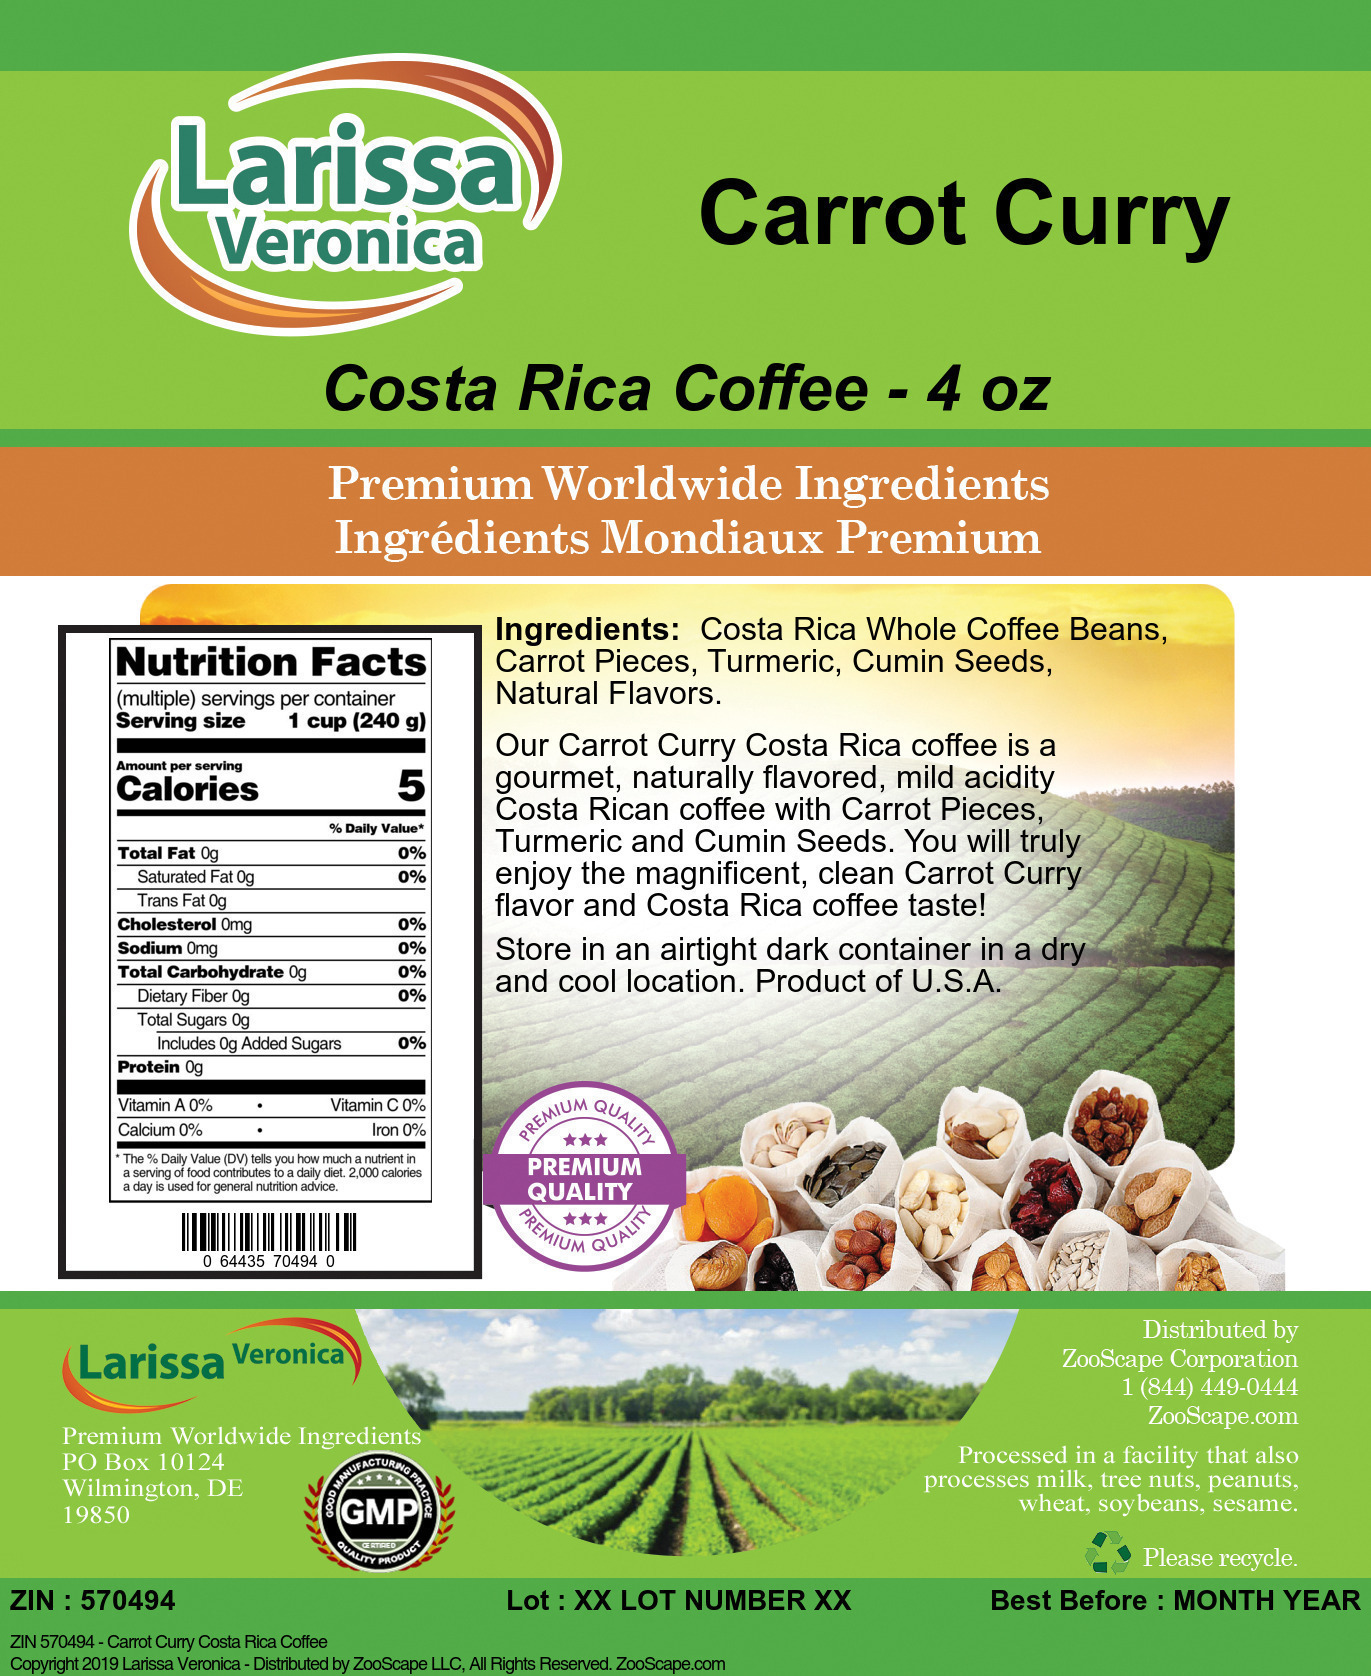 Carrot Curry Costa Rica Coffee - Label